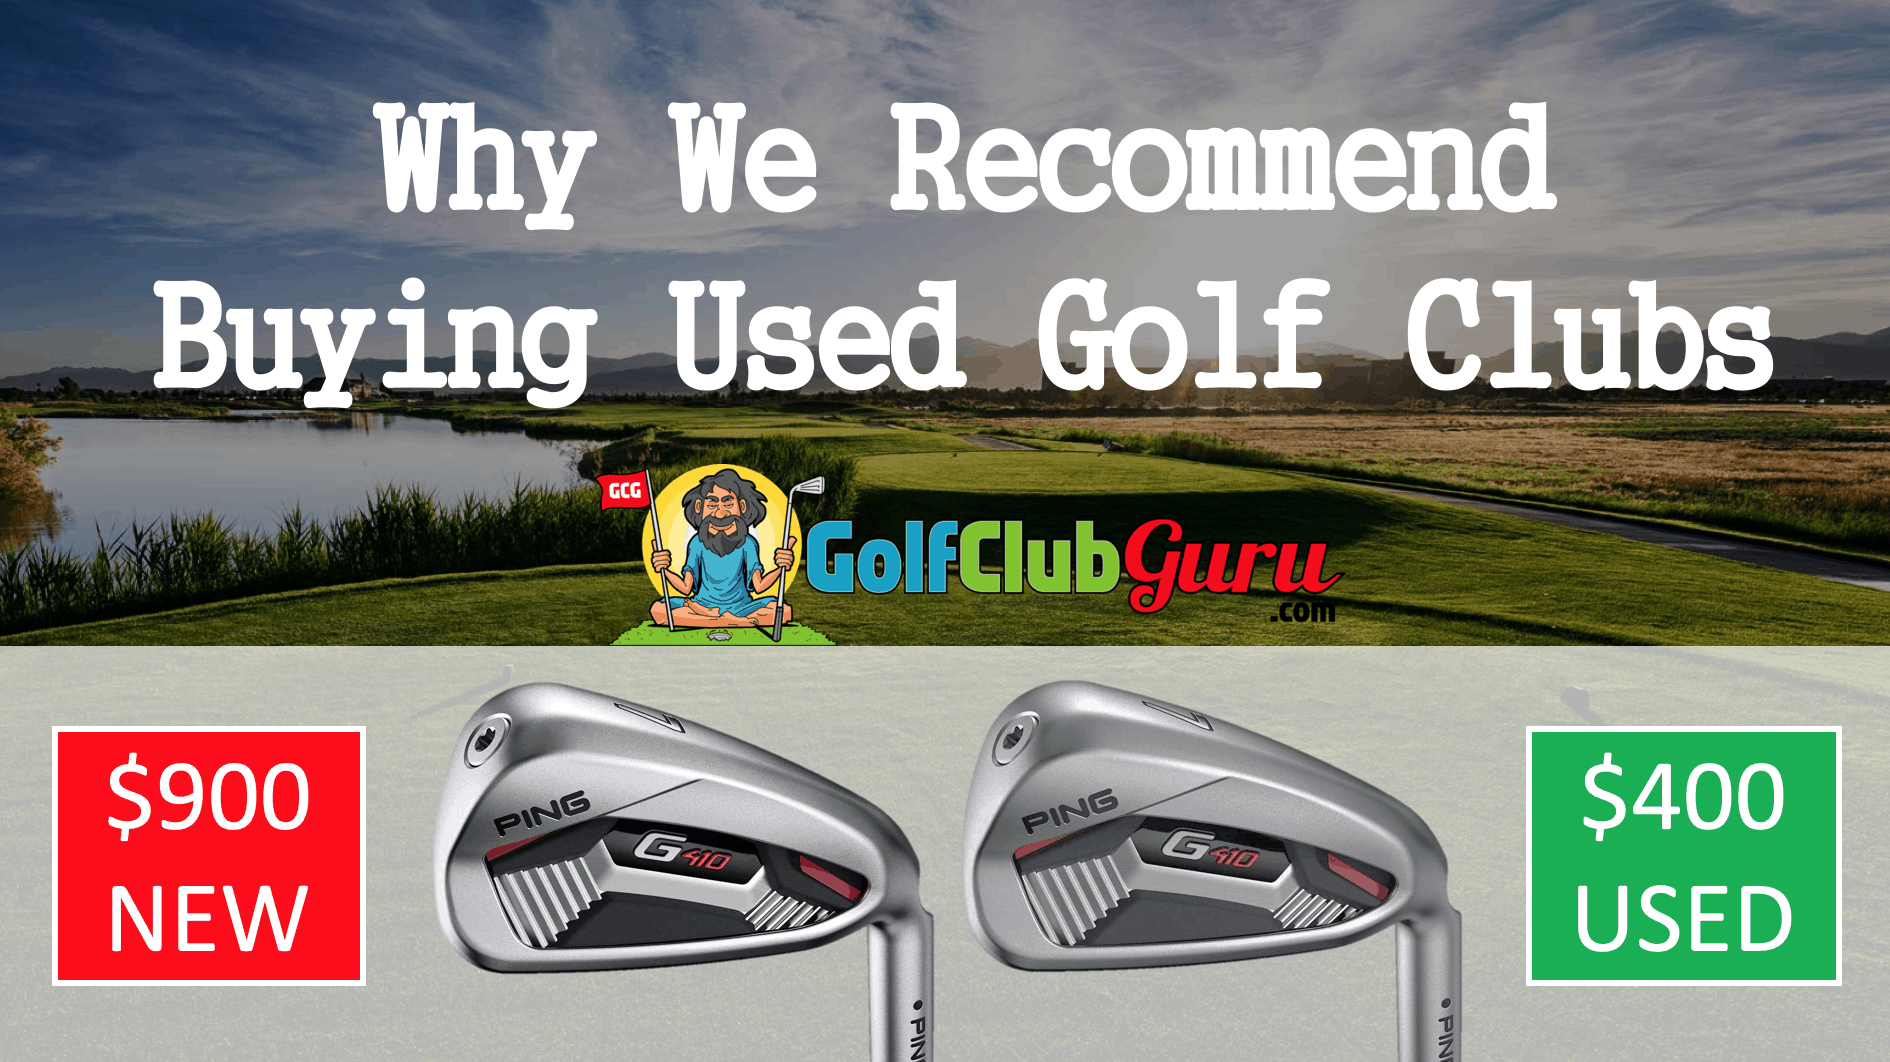 Why We Recommend Buying Used Golf Clubs Instead of New – Golf Club Guru